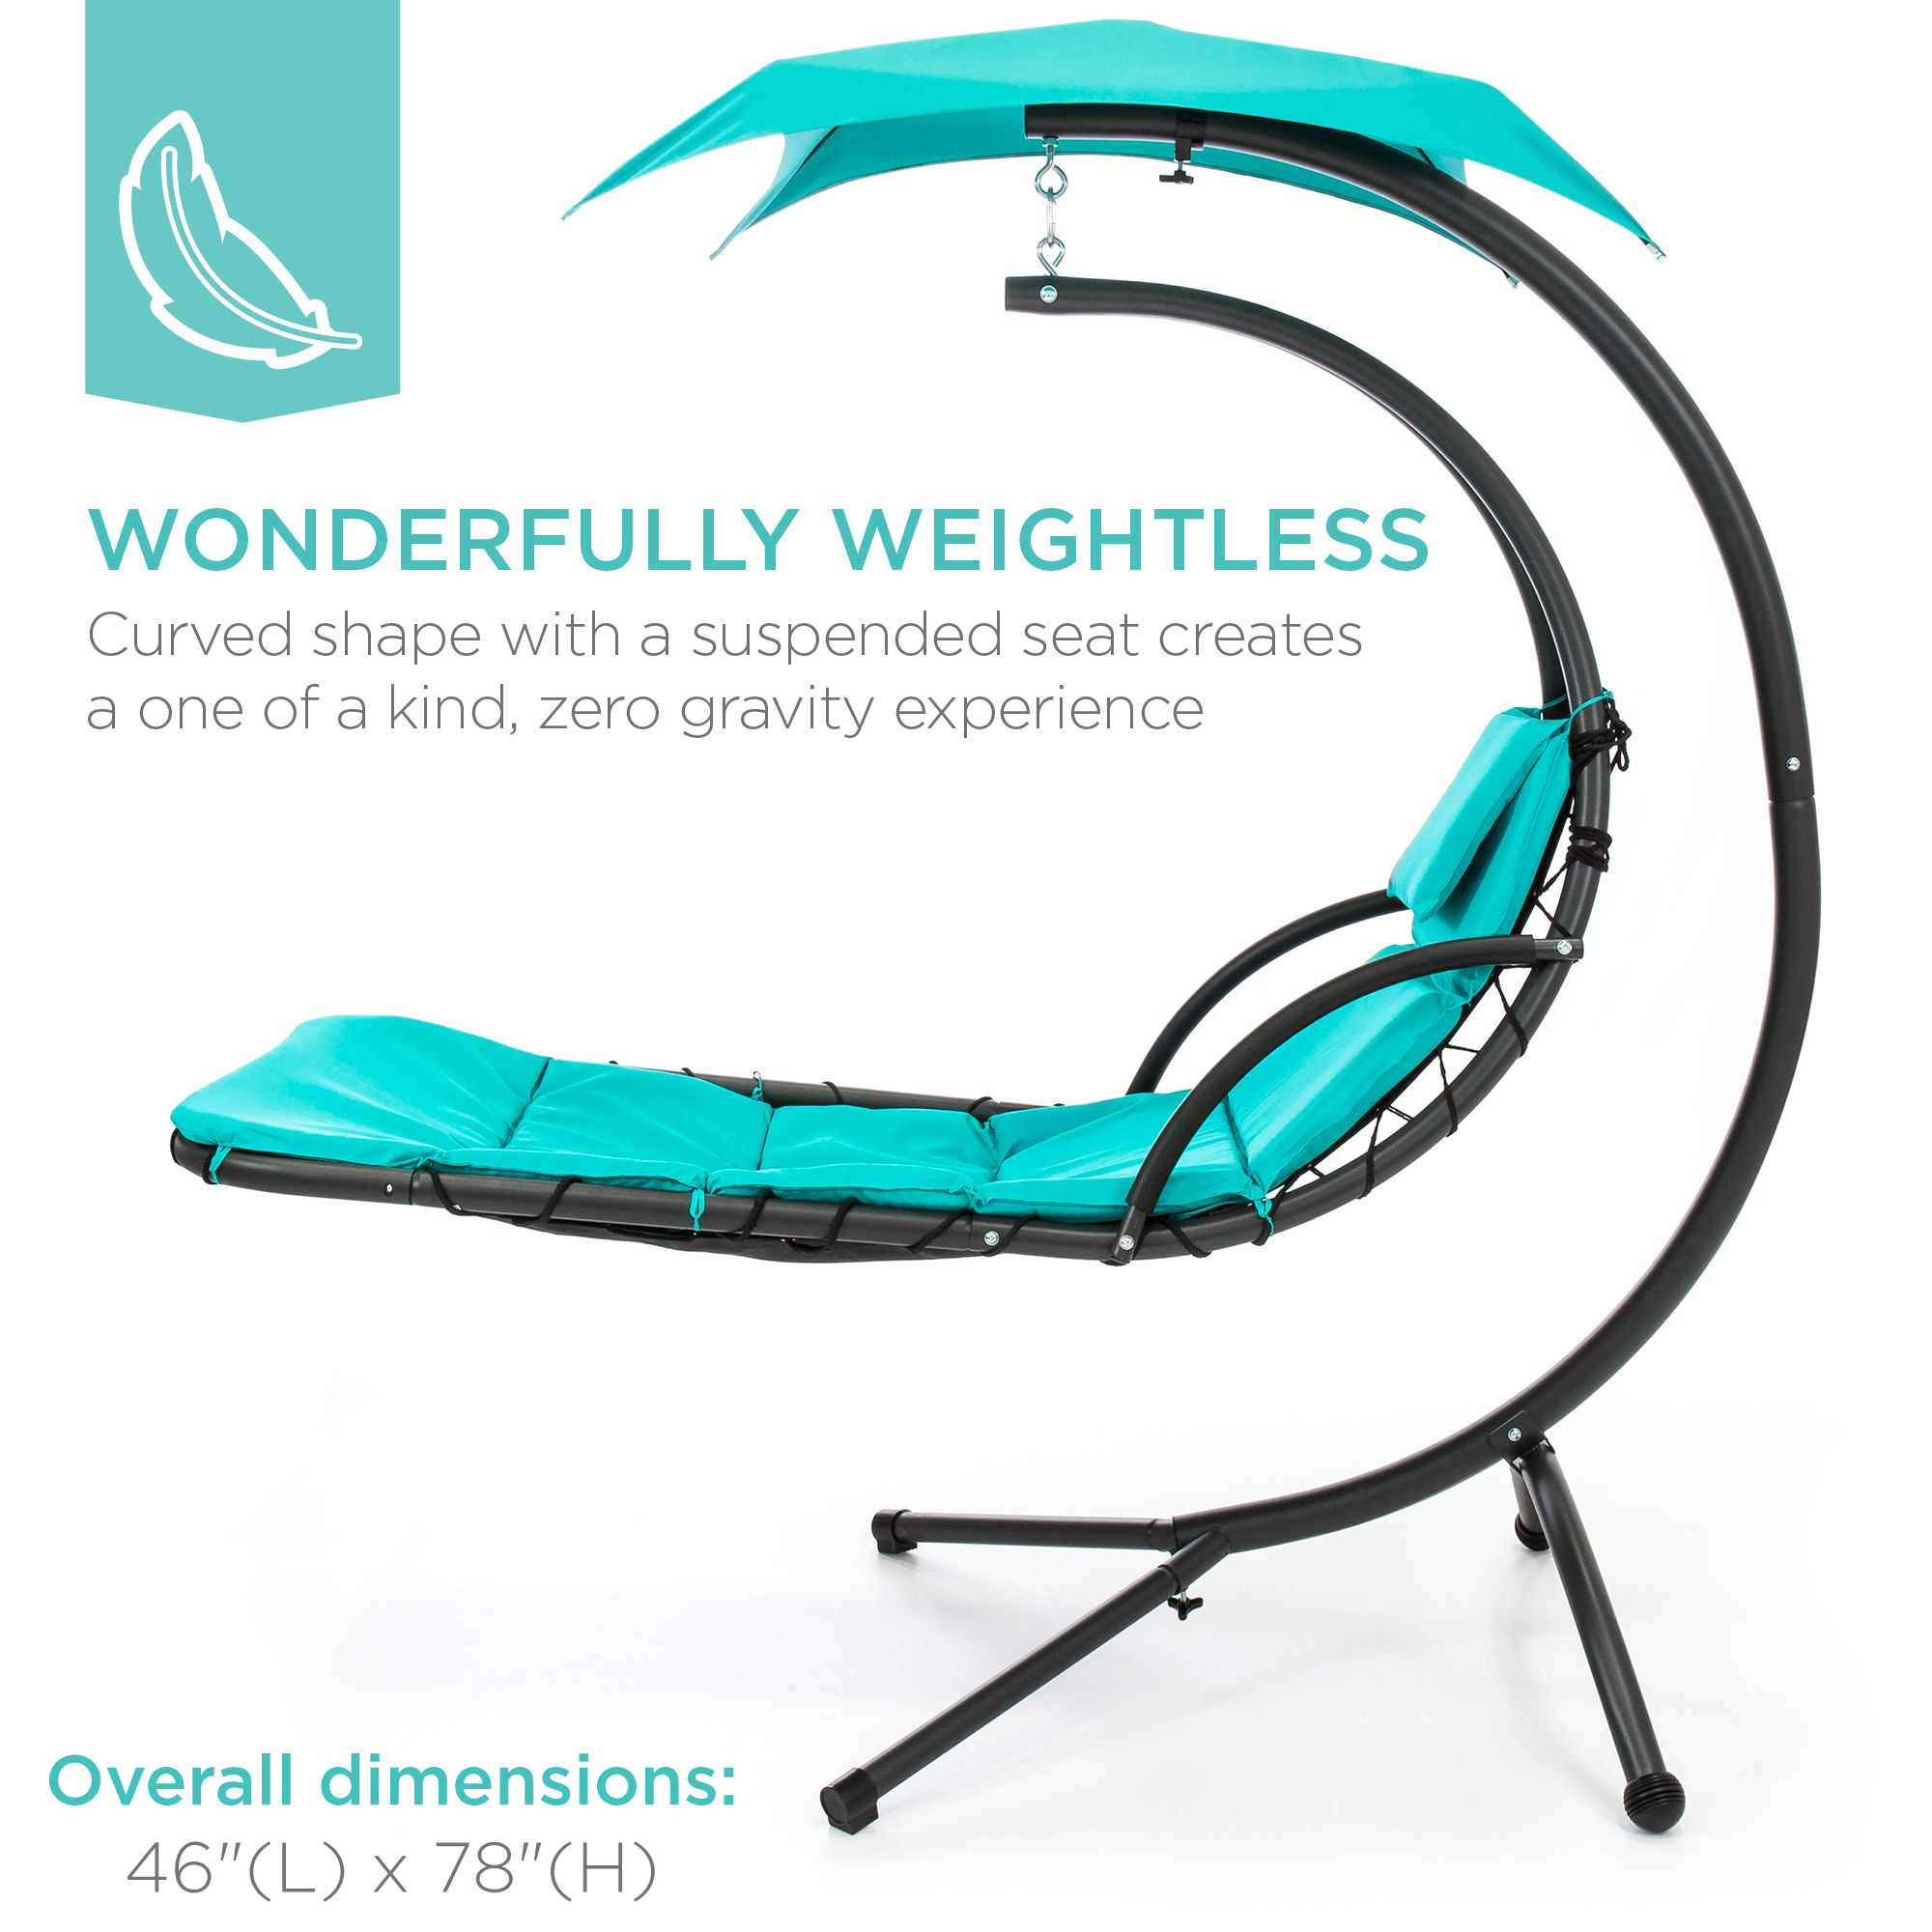 Best Choice Products Hanging Curved Chaise Lounge Chair Swing for Backyard, Patio w/ Pillow, Shade, Stand - Teal - image 3 of 8